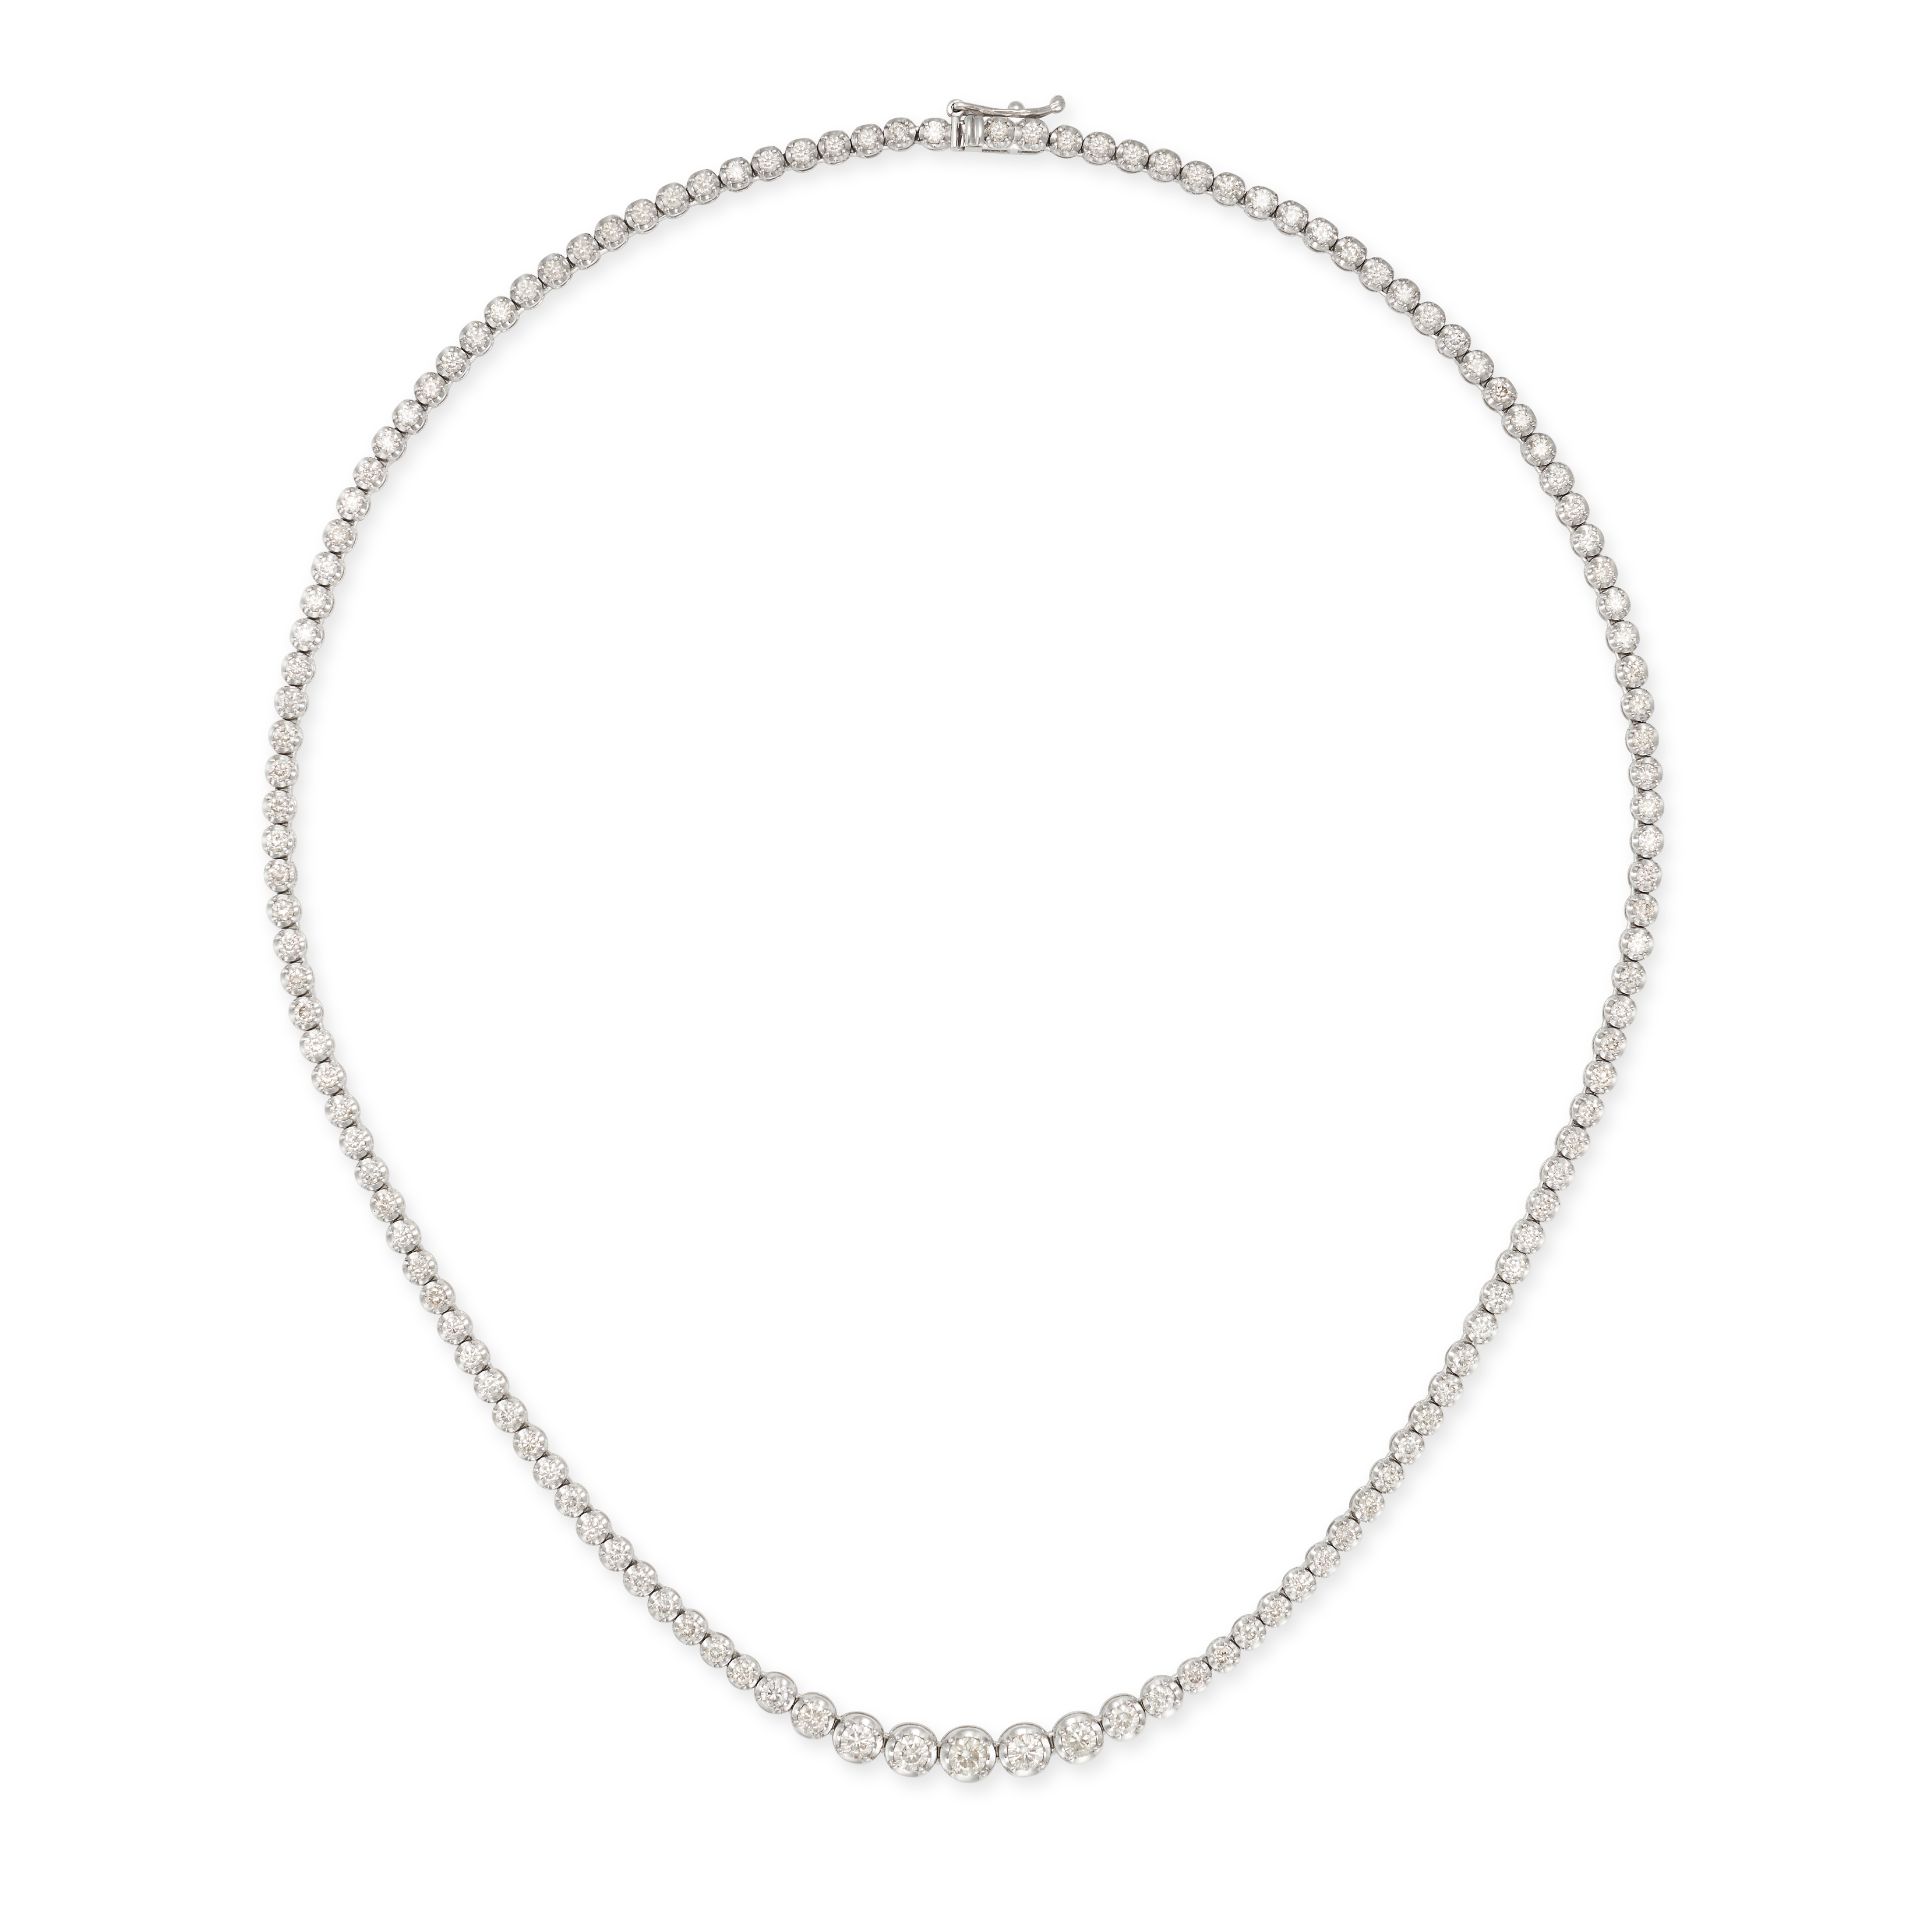 A DIAMOND RIVIERE NECKLACE in 18ct white gold, comprising a graduating row of round brilliant cut...